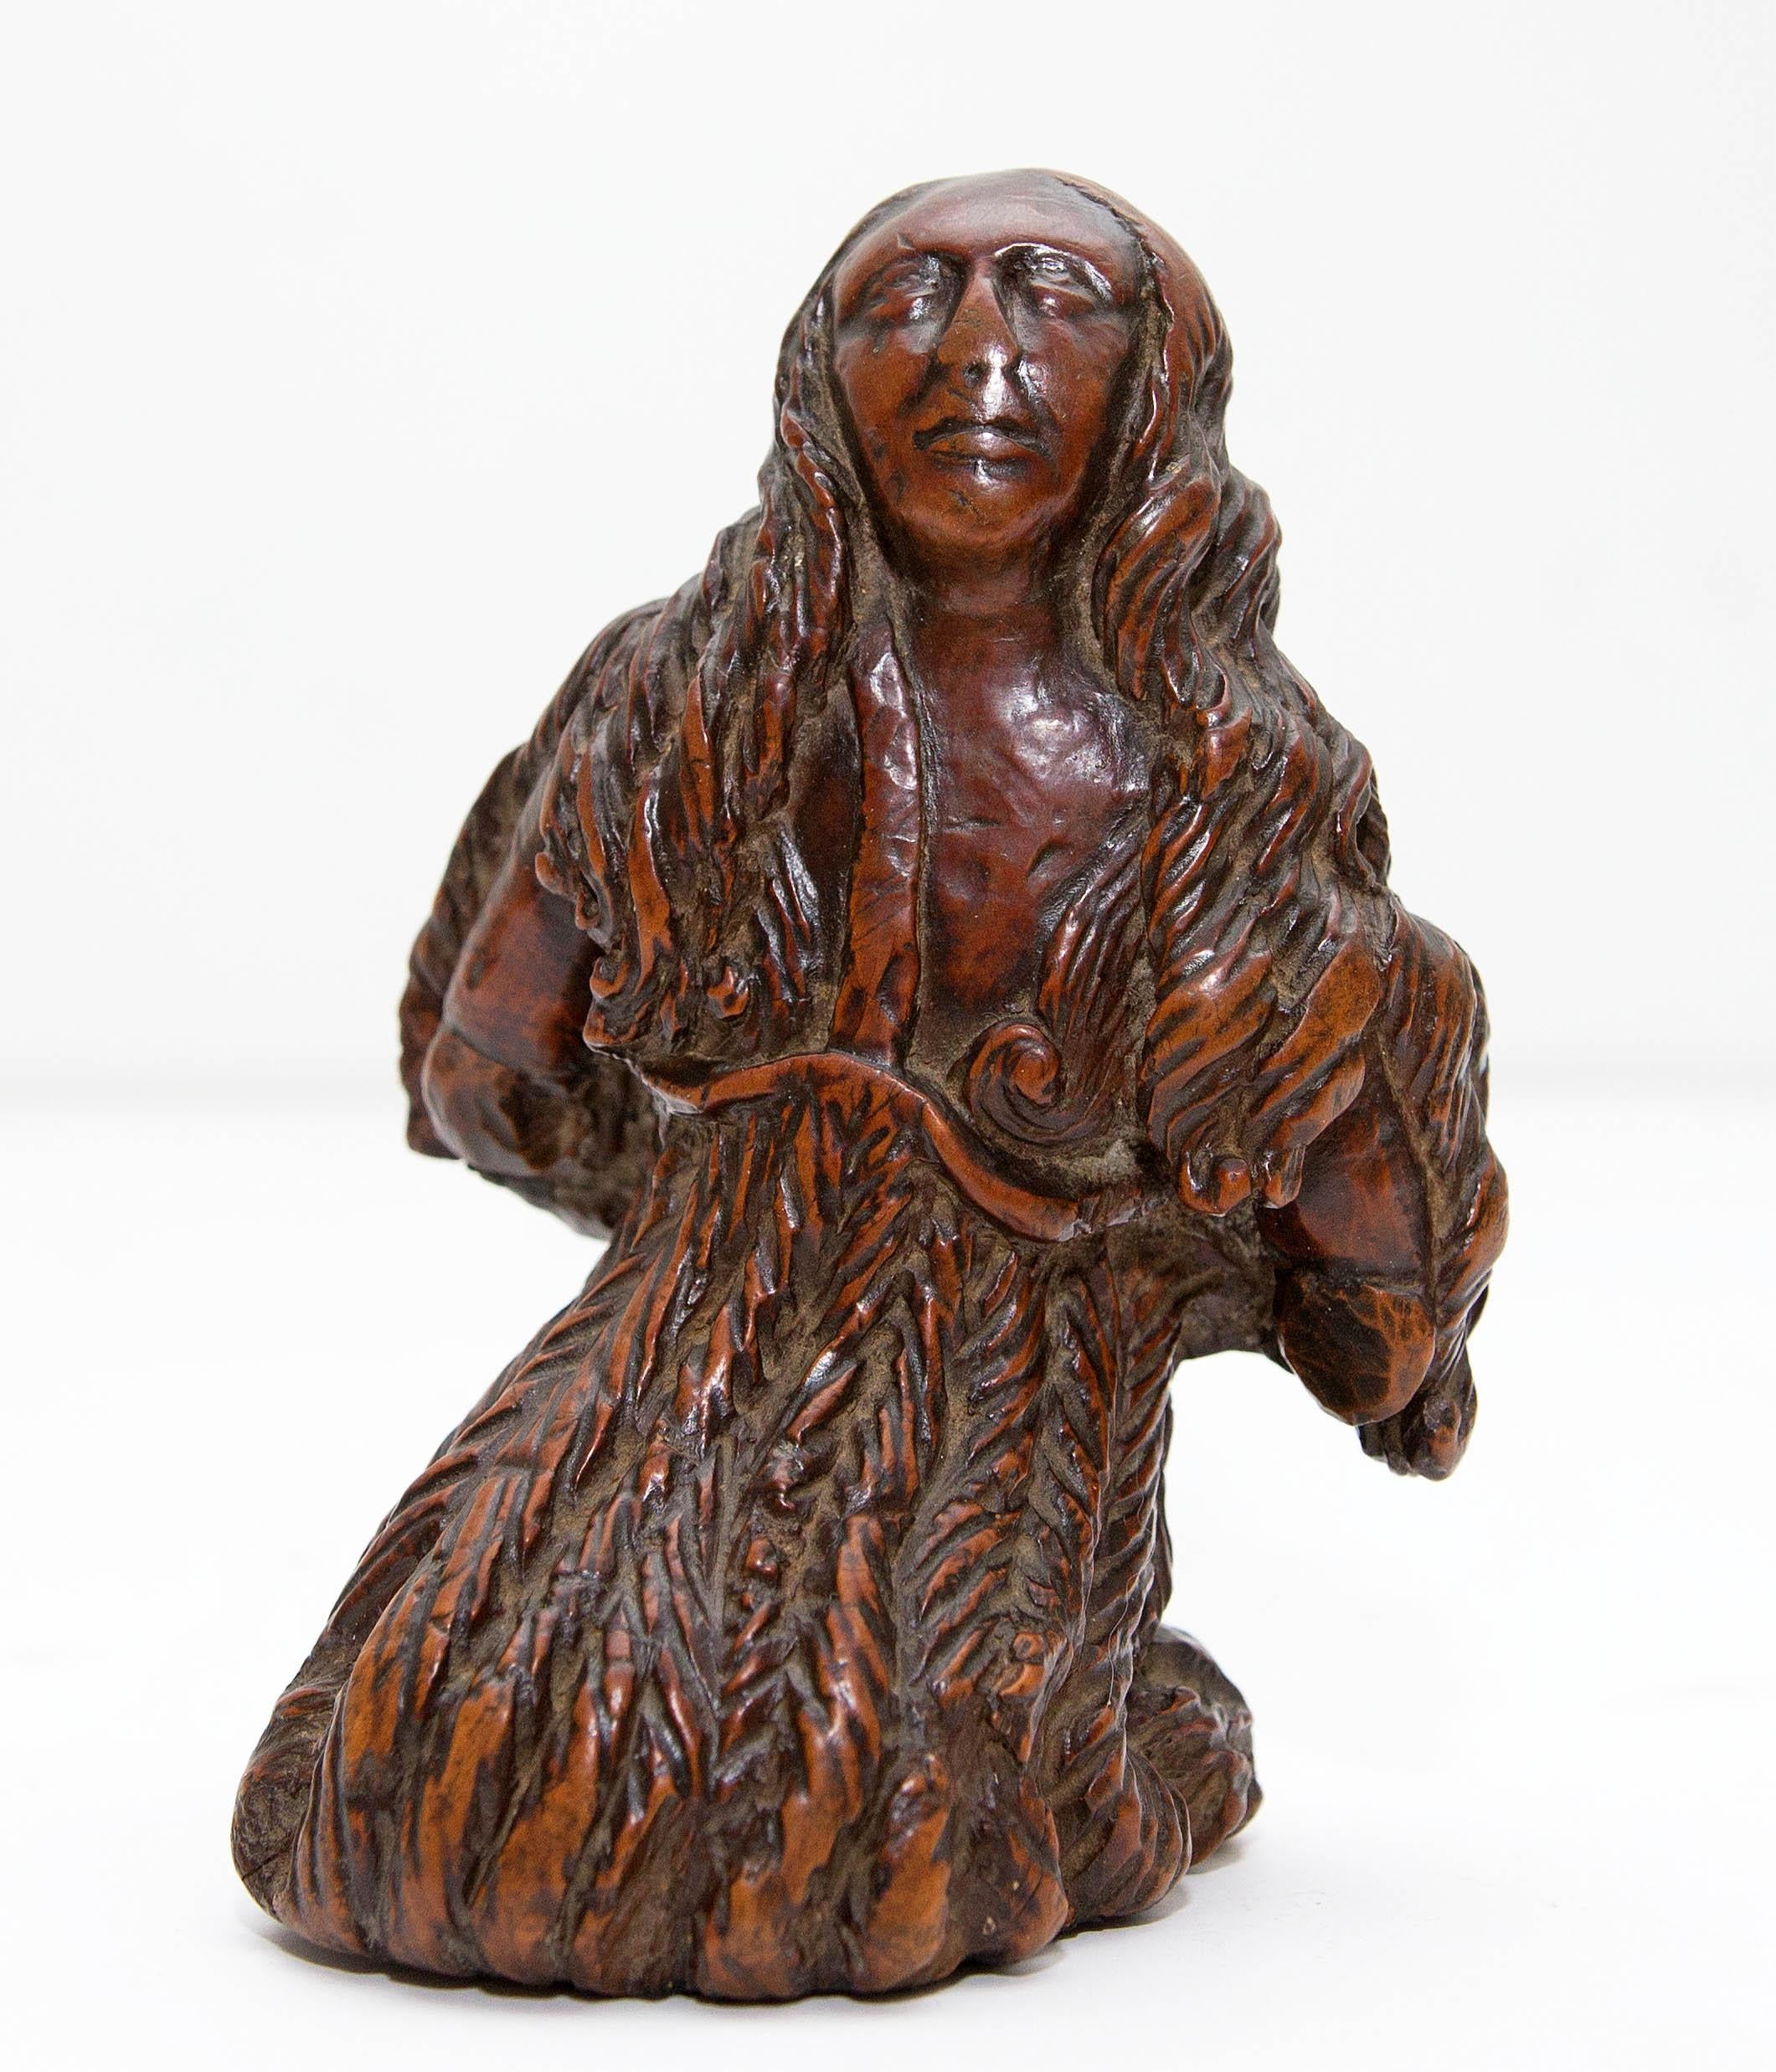 17th Century Flemish Sculpture of a Religious Figure - Brown Figurative Sculpture by Unknown